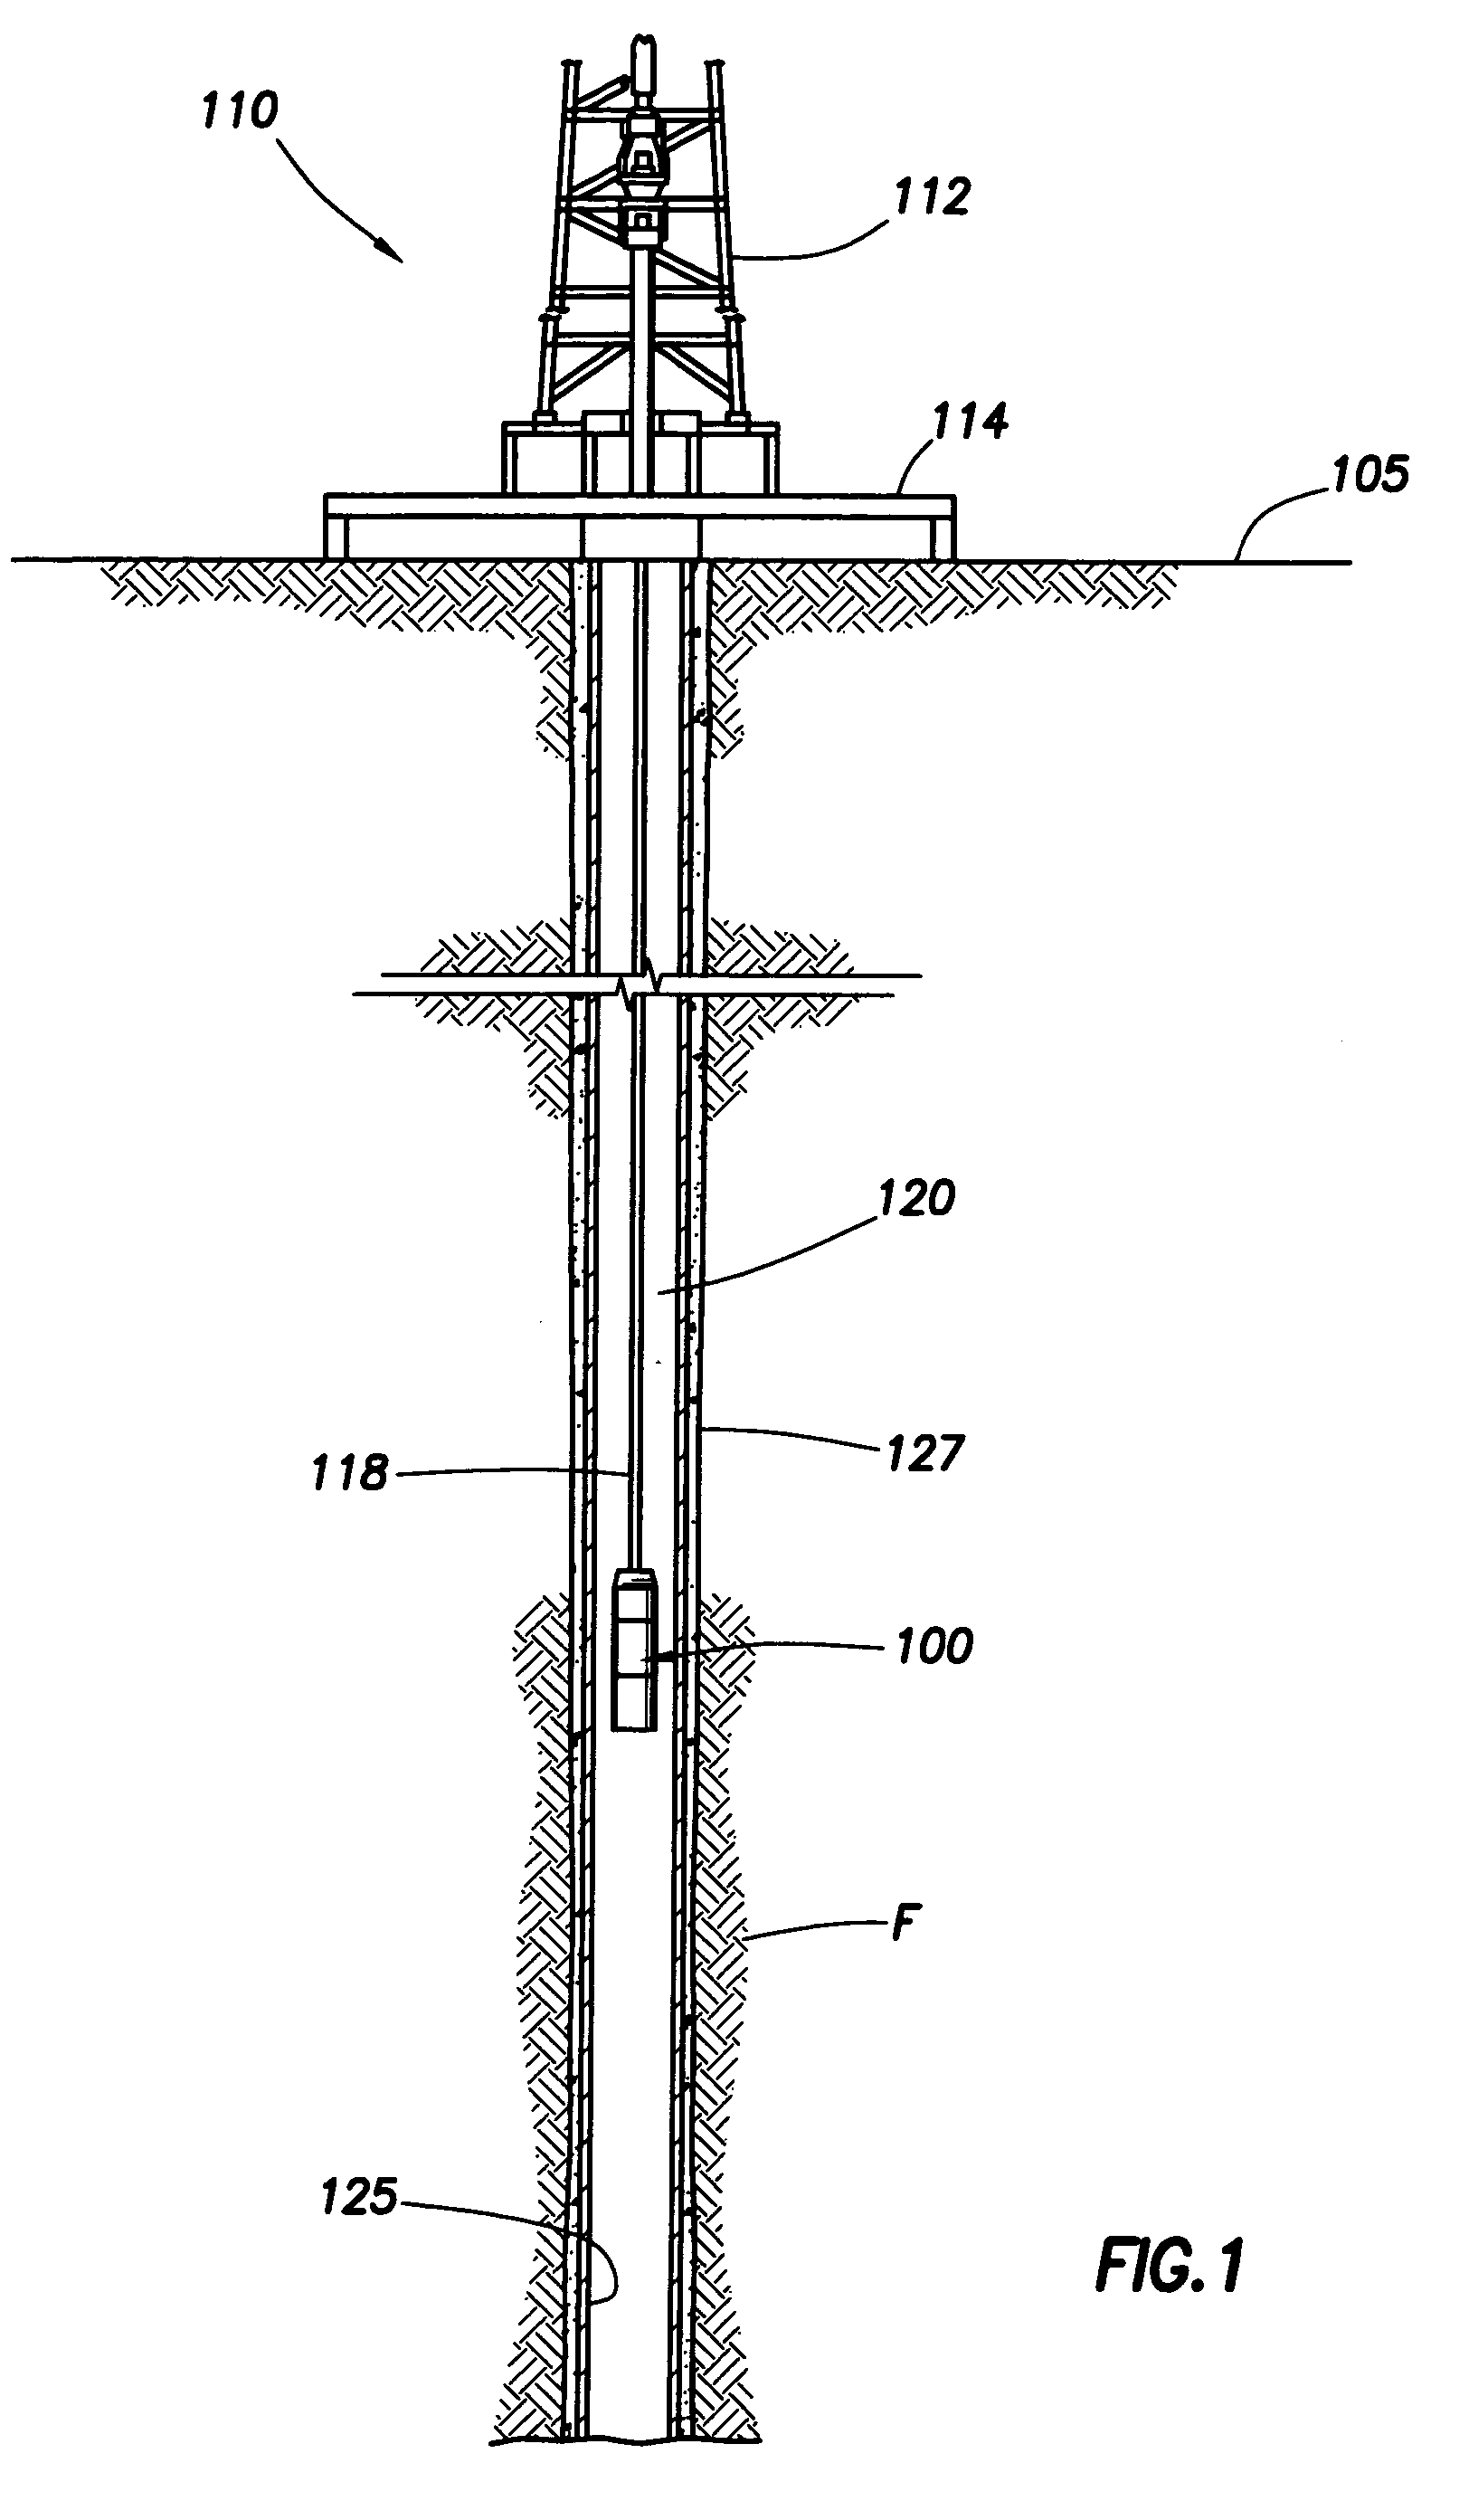 One-time use composite tool formed of fibers and a biodegradable resin